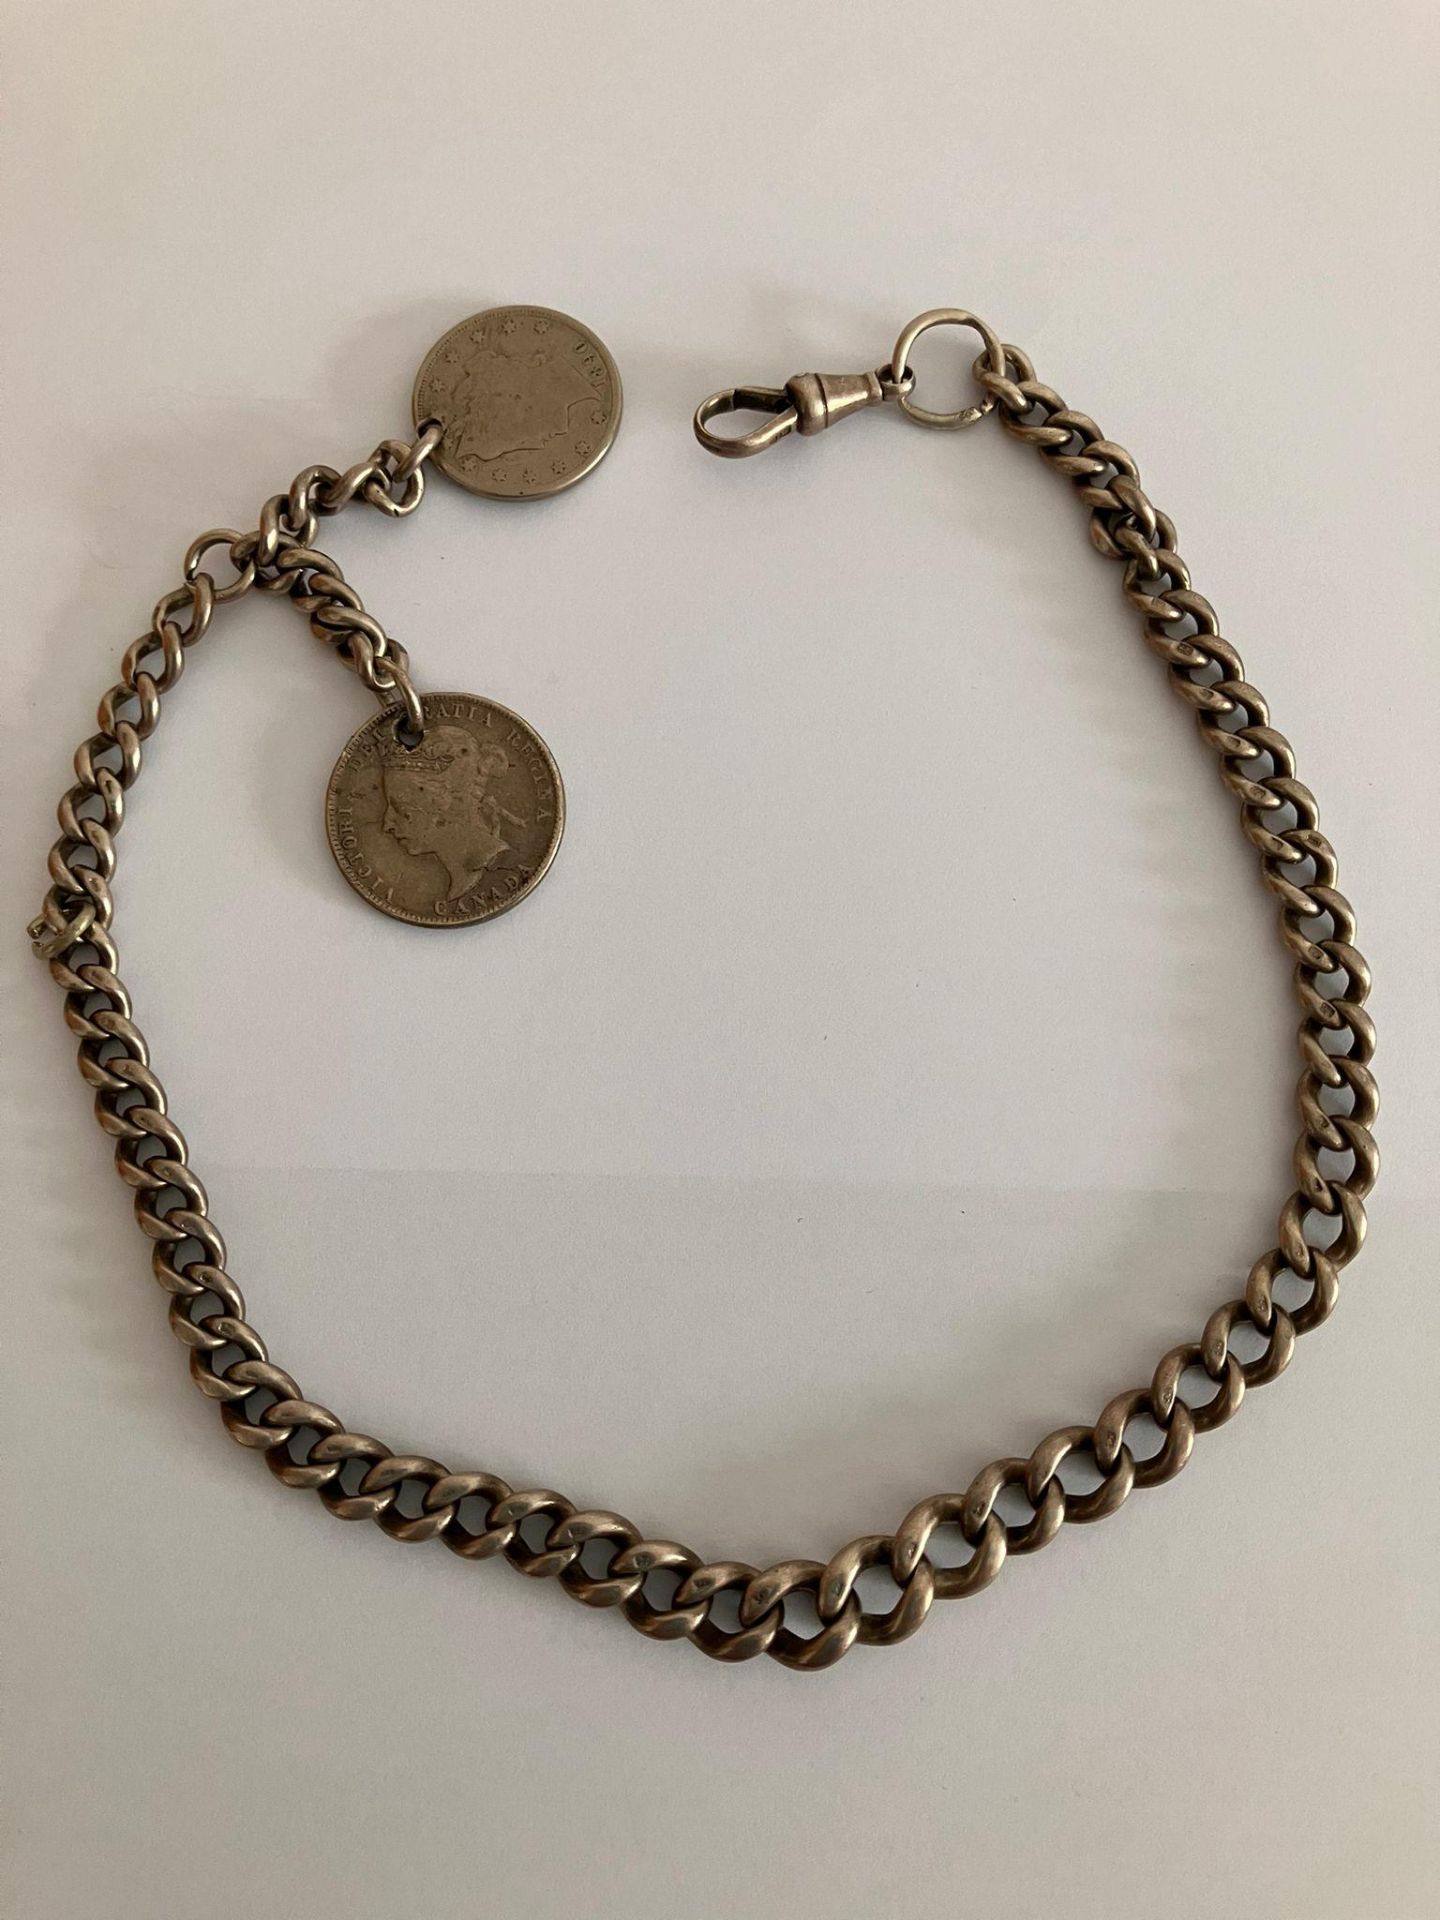 Antique SOLID SILVER ALBERT WATCH CHAIN. Complete with two antique silver coin fobs, To include a